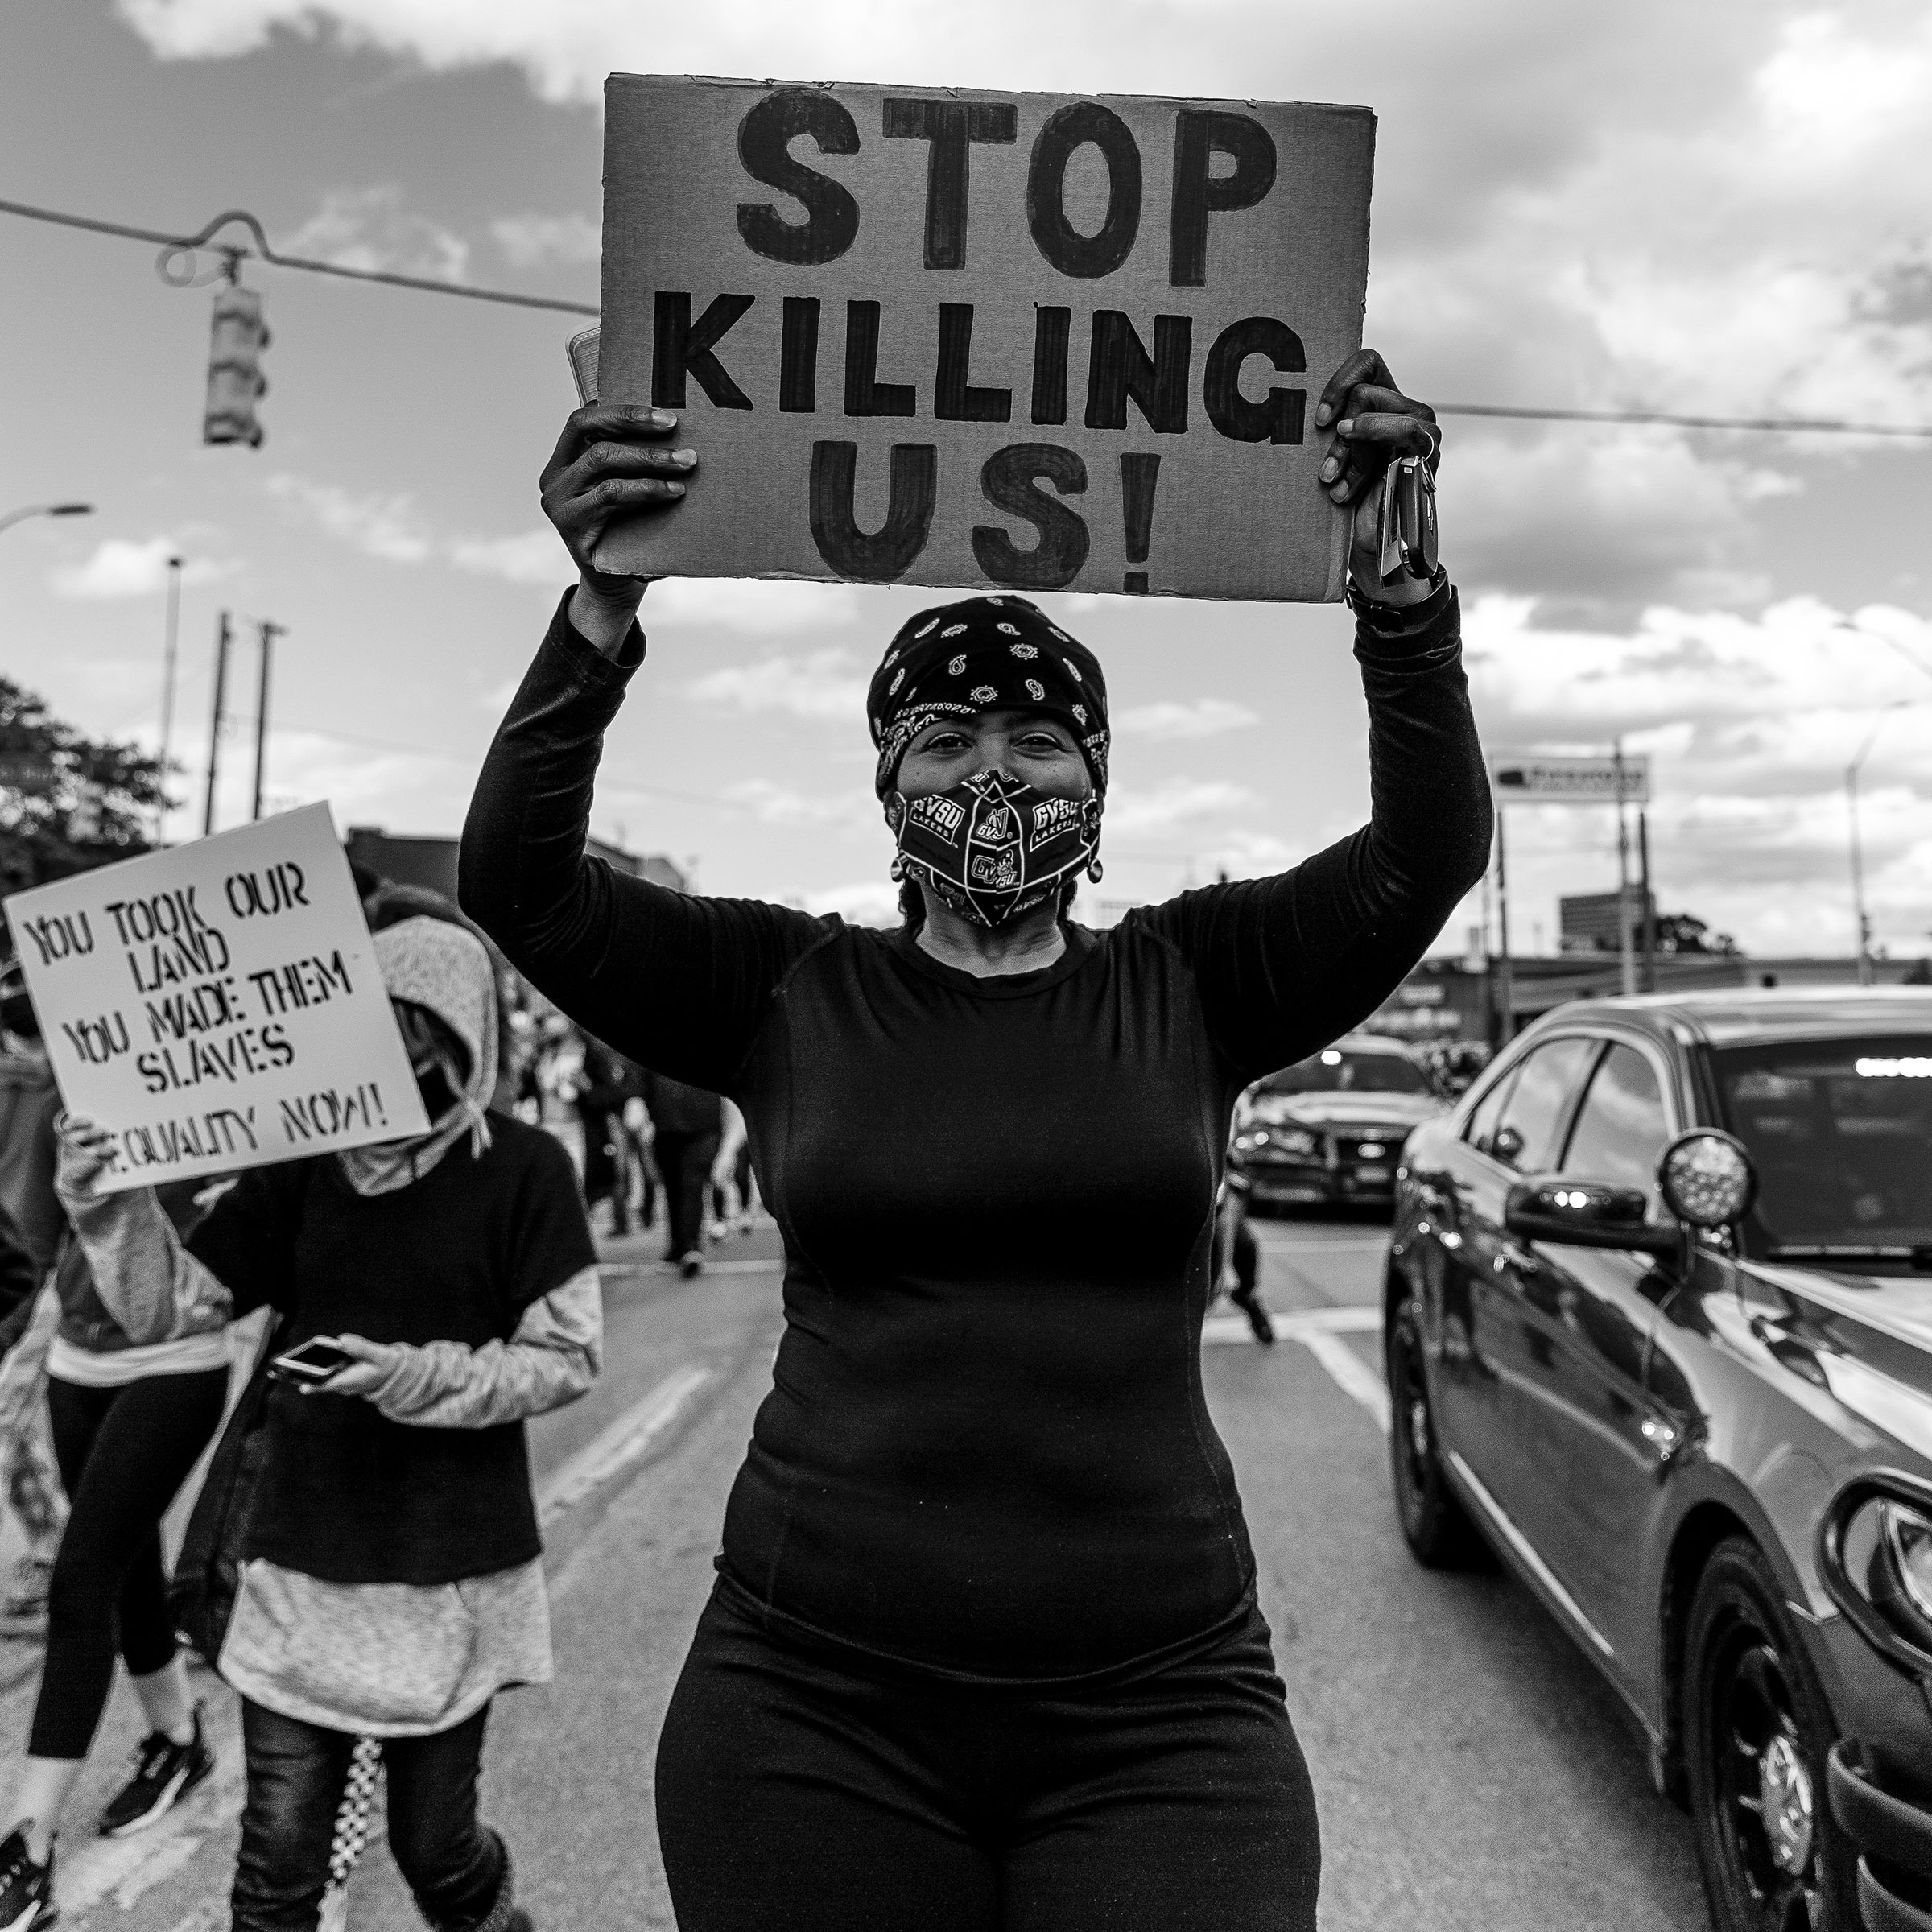 Stacey Graham of Detroit holds her sign while marching down Michigan Ave. during the second consecutive day of protests against the death in Minneapolis police custody of African-American man George Floyd on Saturday, May 30, 2020 in Detroit, Mich. On Friday night, protests escalated resulting in dozens of arrests and a shooting death of a 21-year old man. “We’re just so tired, we’re exhausted. I have a son and grandson fear for them all the time,” she said. “That’s no way to live…to live in fear.”